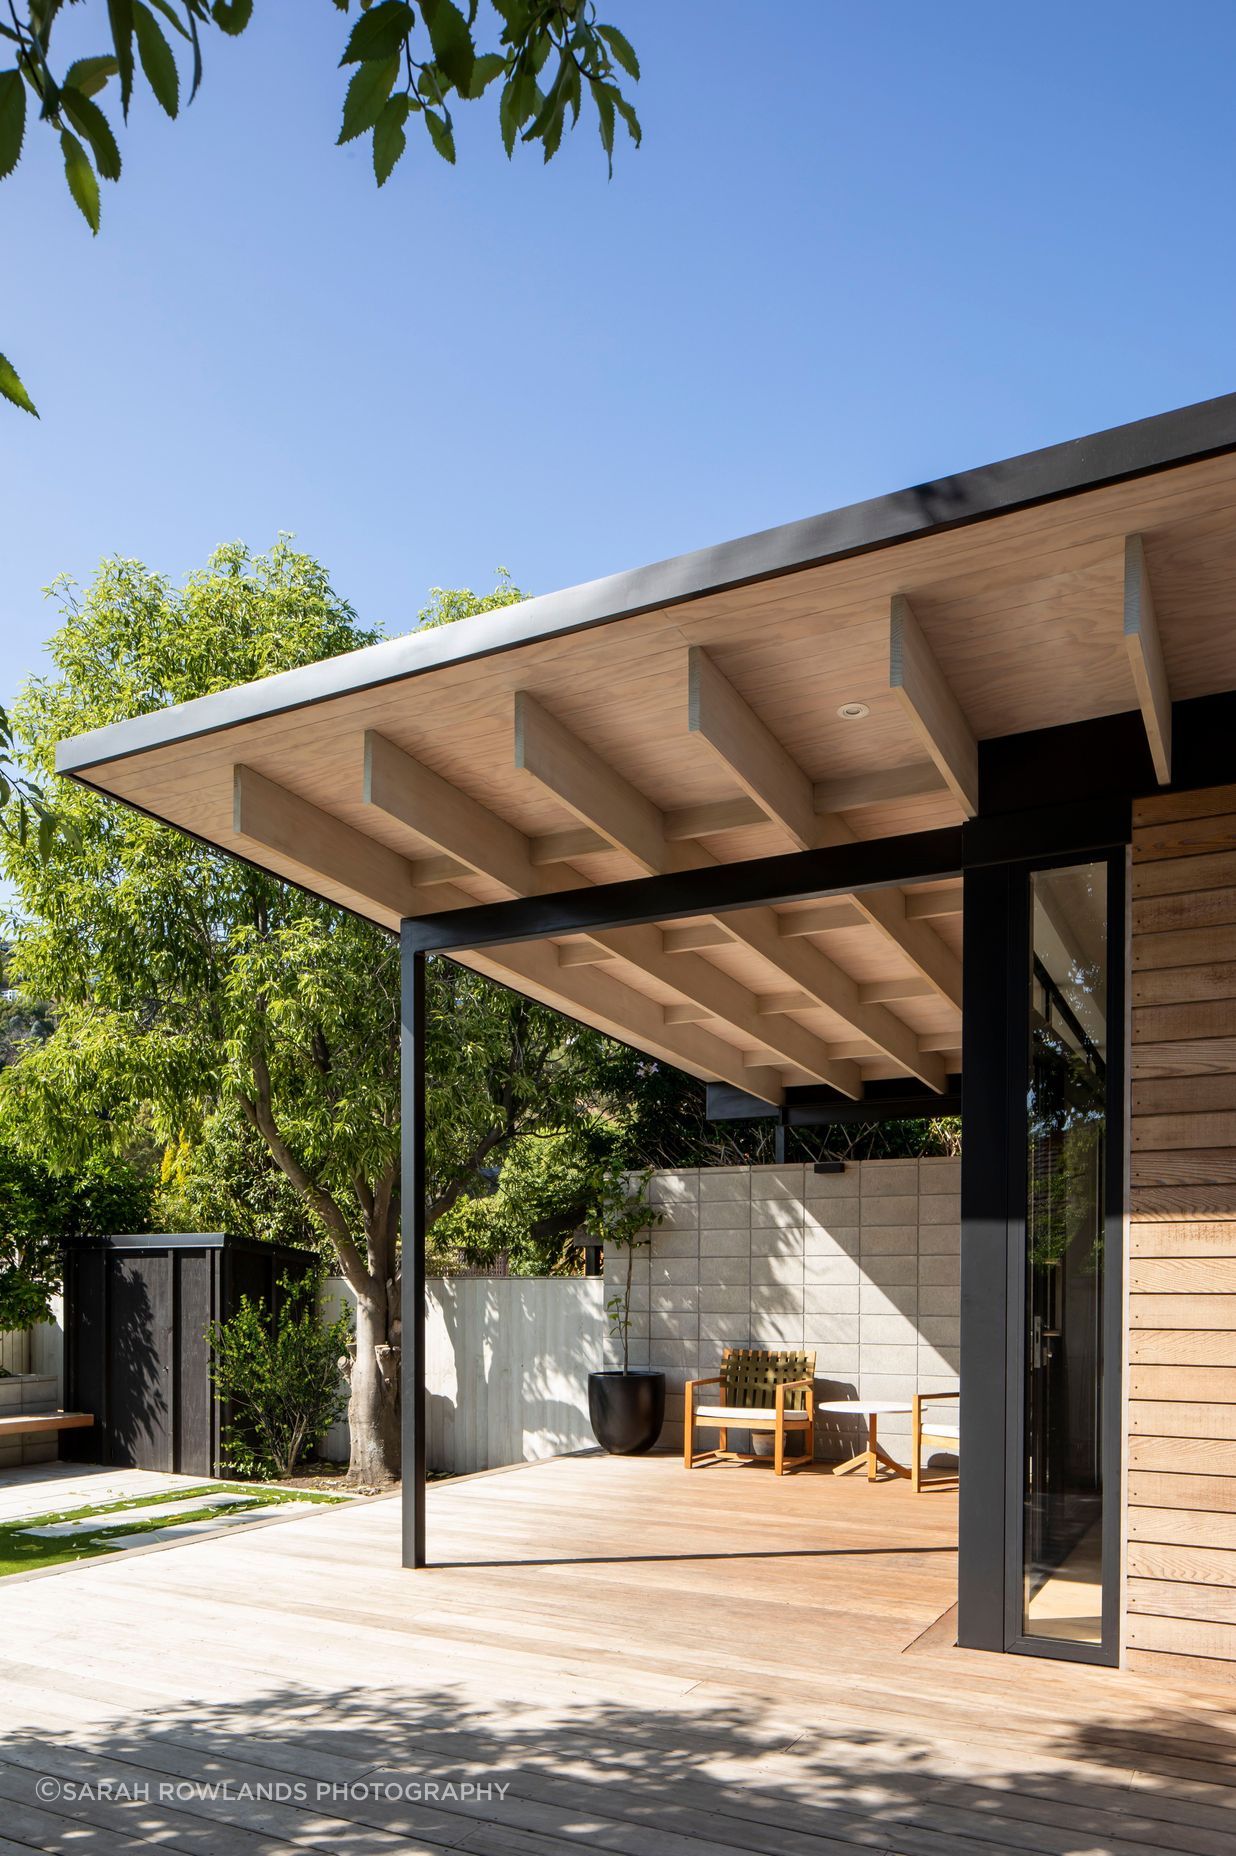 The roof extends past the building envelope to create a sheltered outdoor space, which acts as a second living area and a transition zone between the house and the garden.